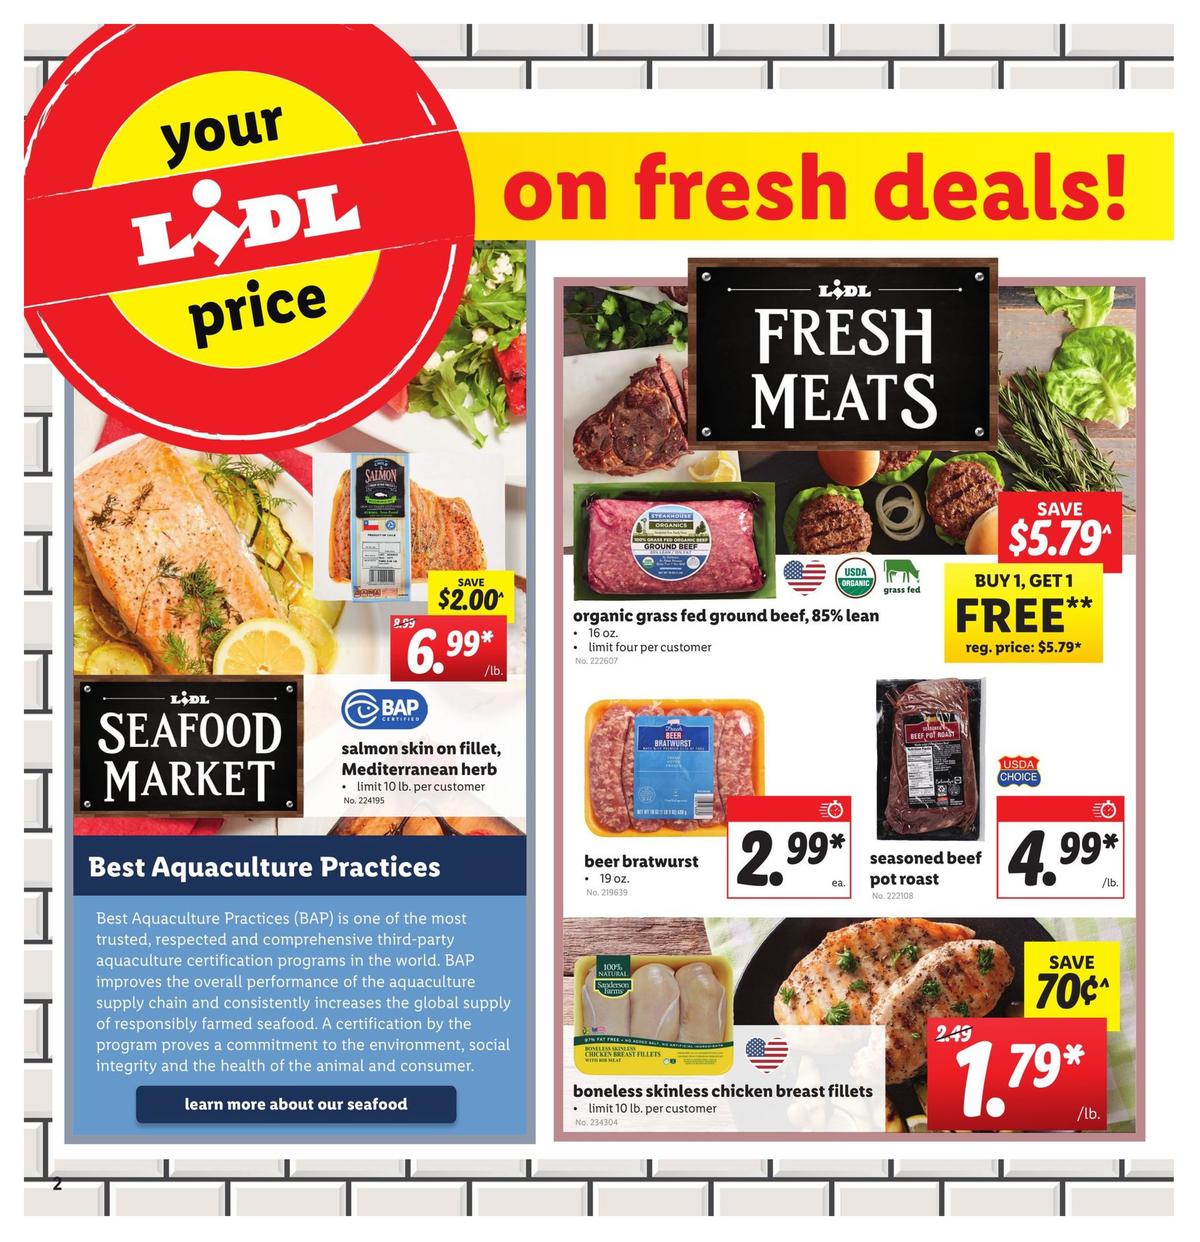 LIDL Weekly Ad from January 29